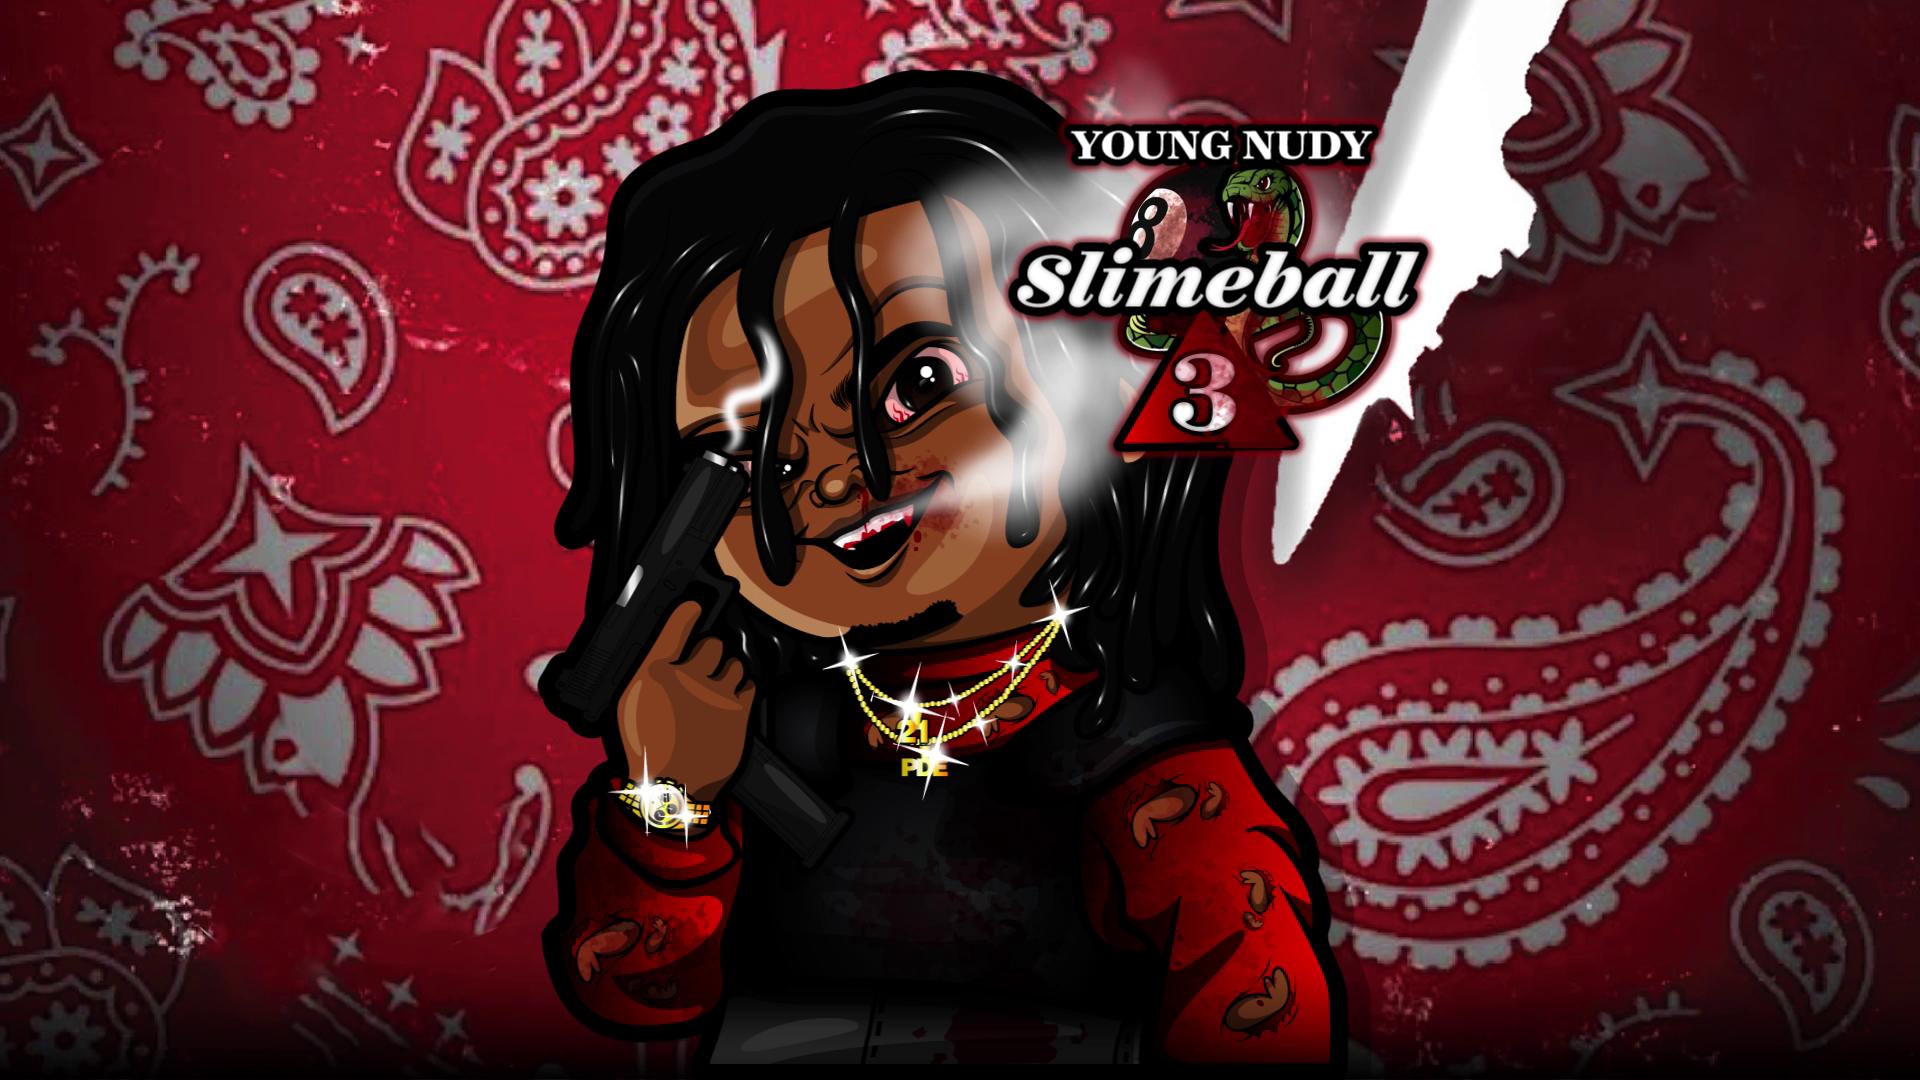 Young Nudy DR EVIL wallpaper  rhiphopwallpapers